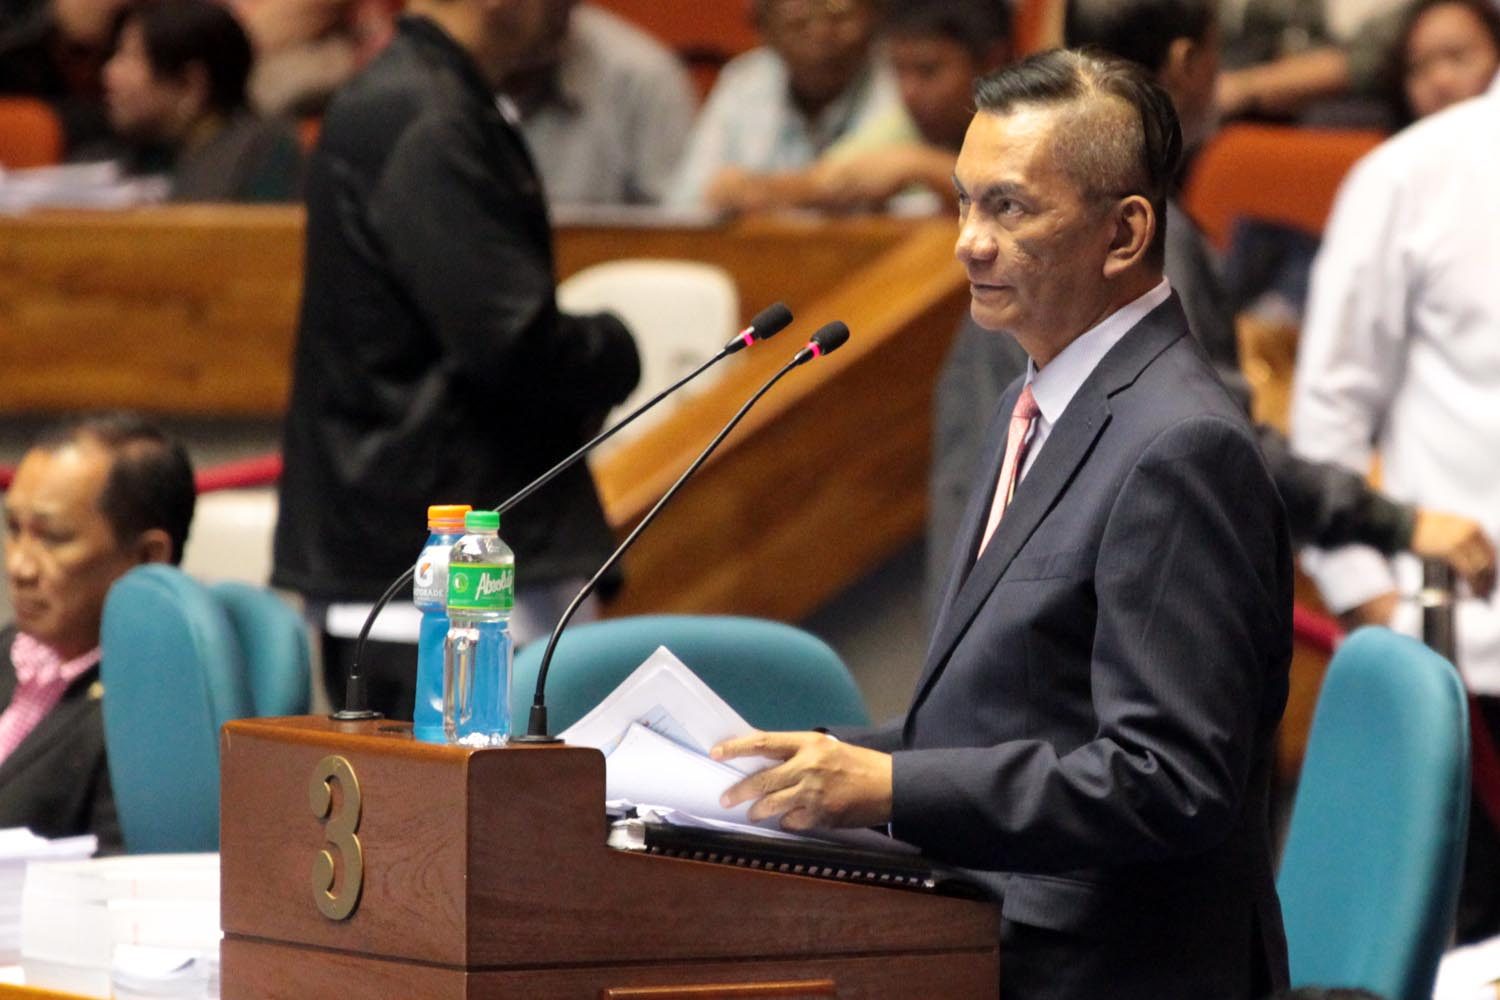 7 problems with free tuition law implementation, according to Salceda